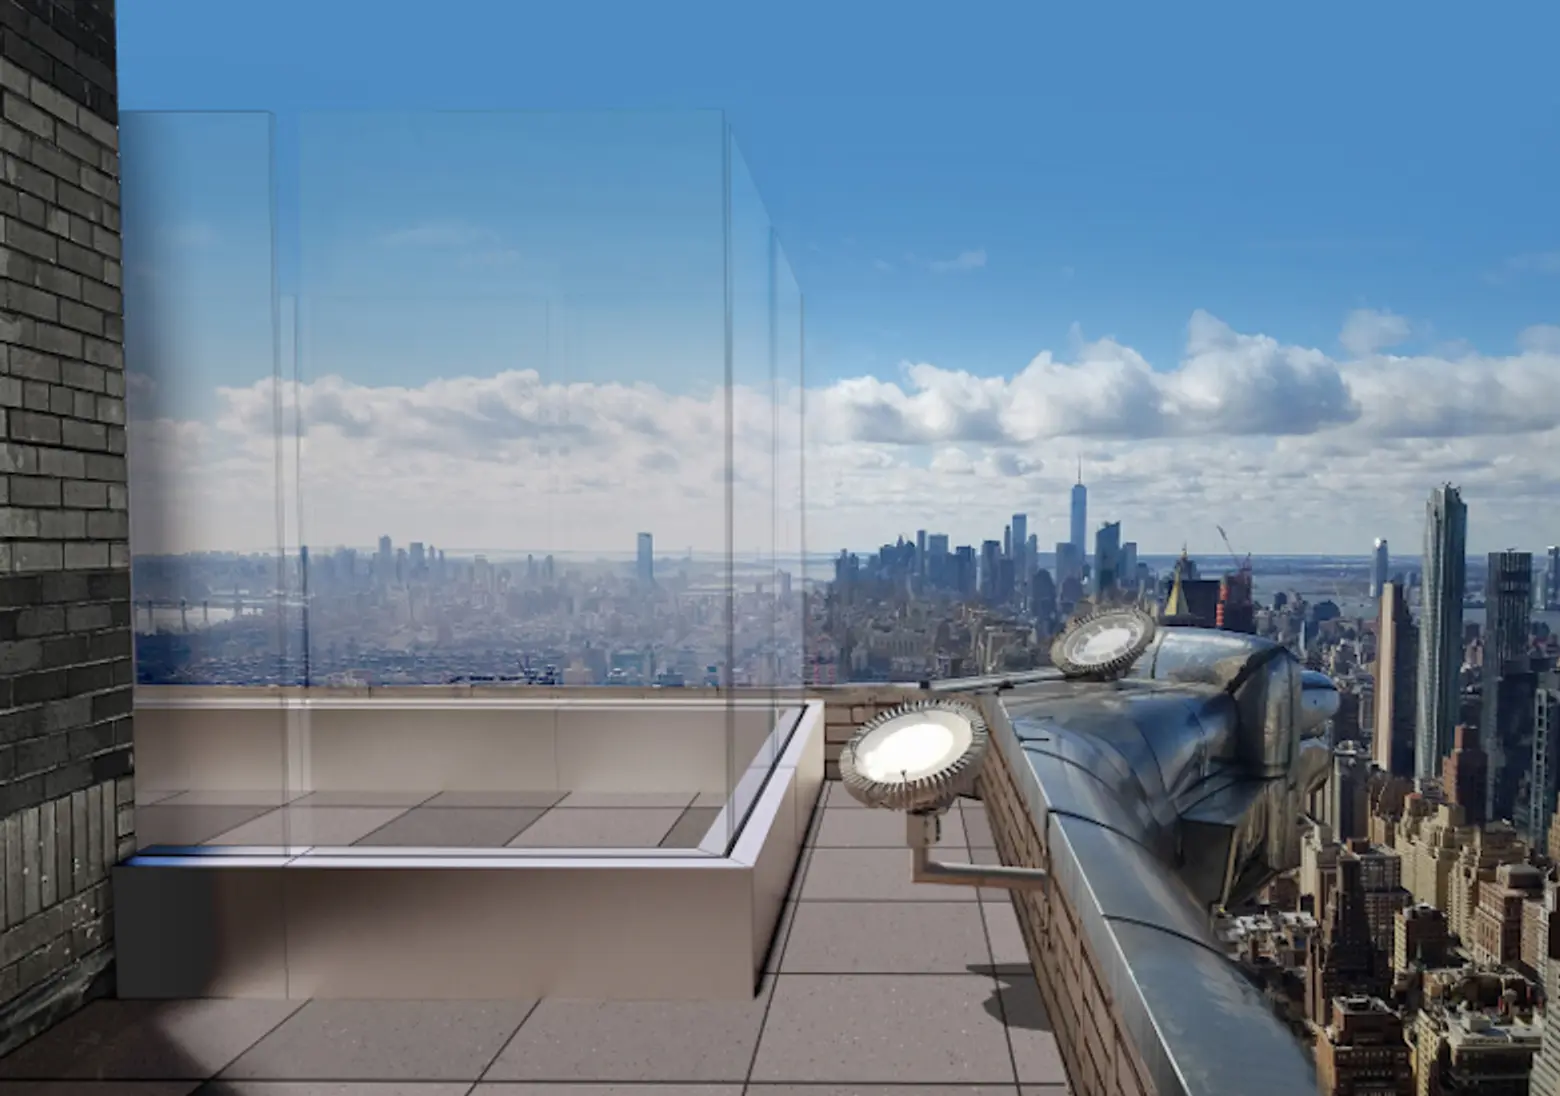 See the observation deck proposed for the Chrysler Building